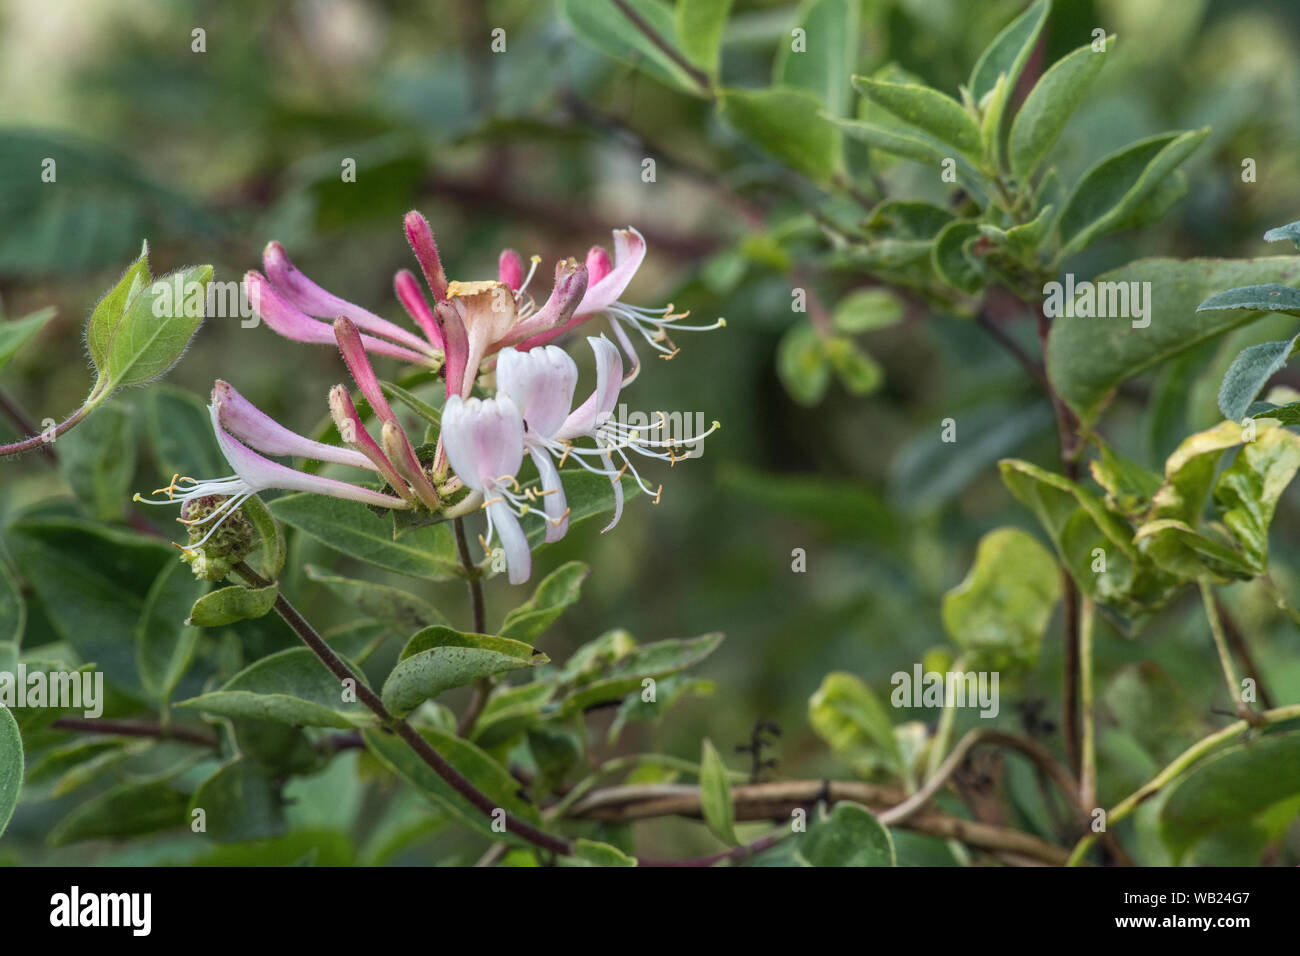 Close-up shot flowers of wild Honeysuckle / Lonicera periclymenum in an English country hedgerow. Medicinal plant used in herbal remedies. Stock Photo